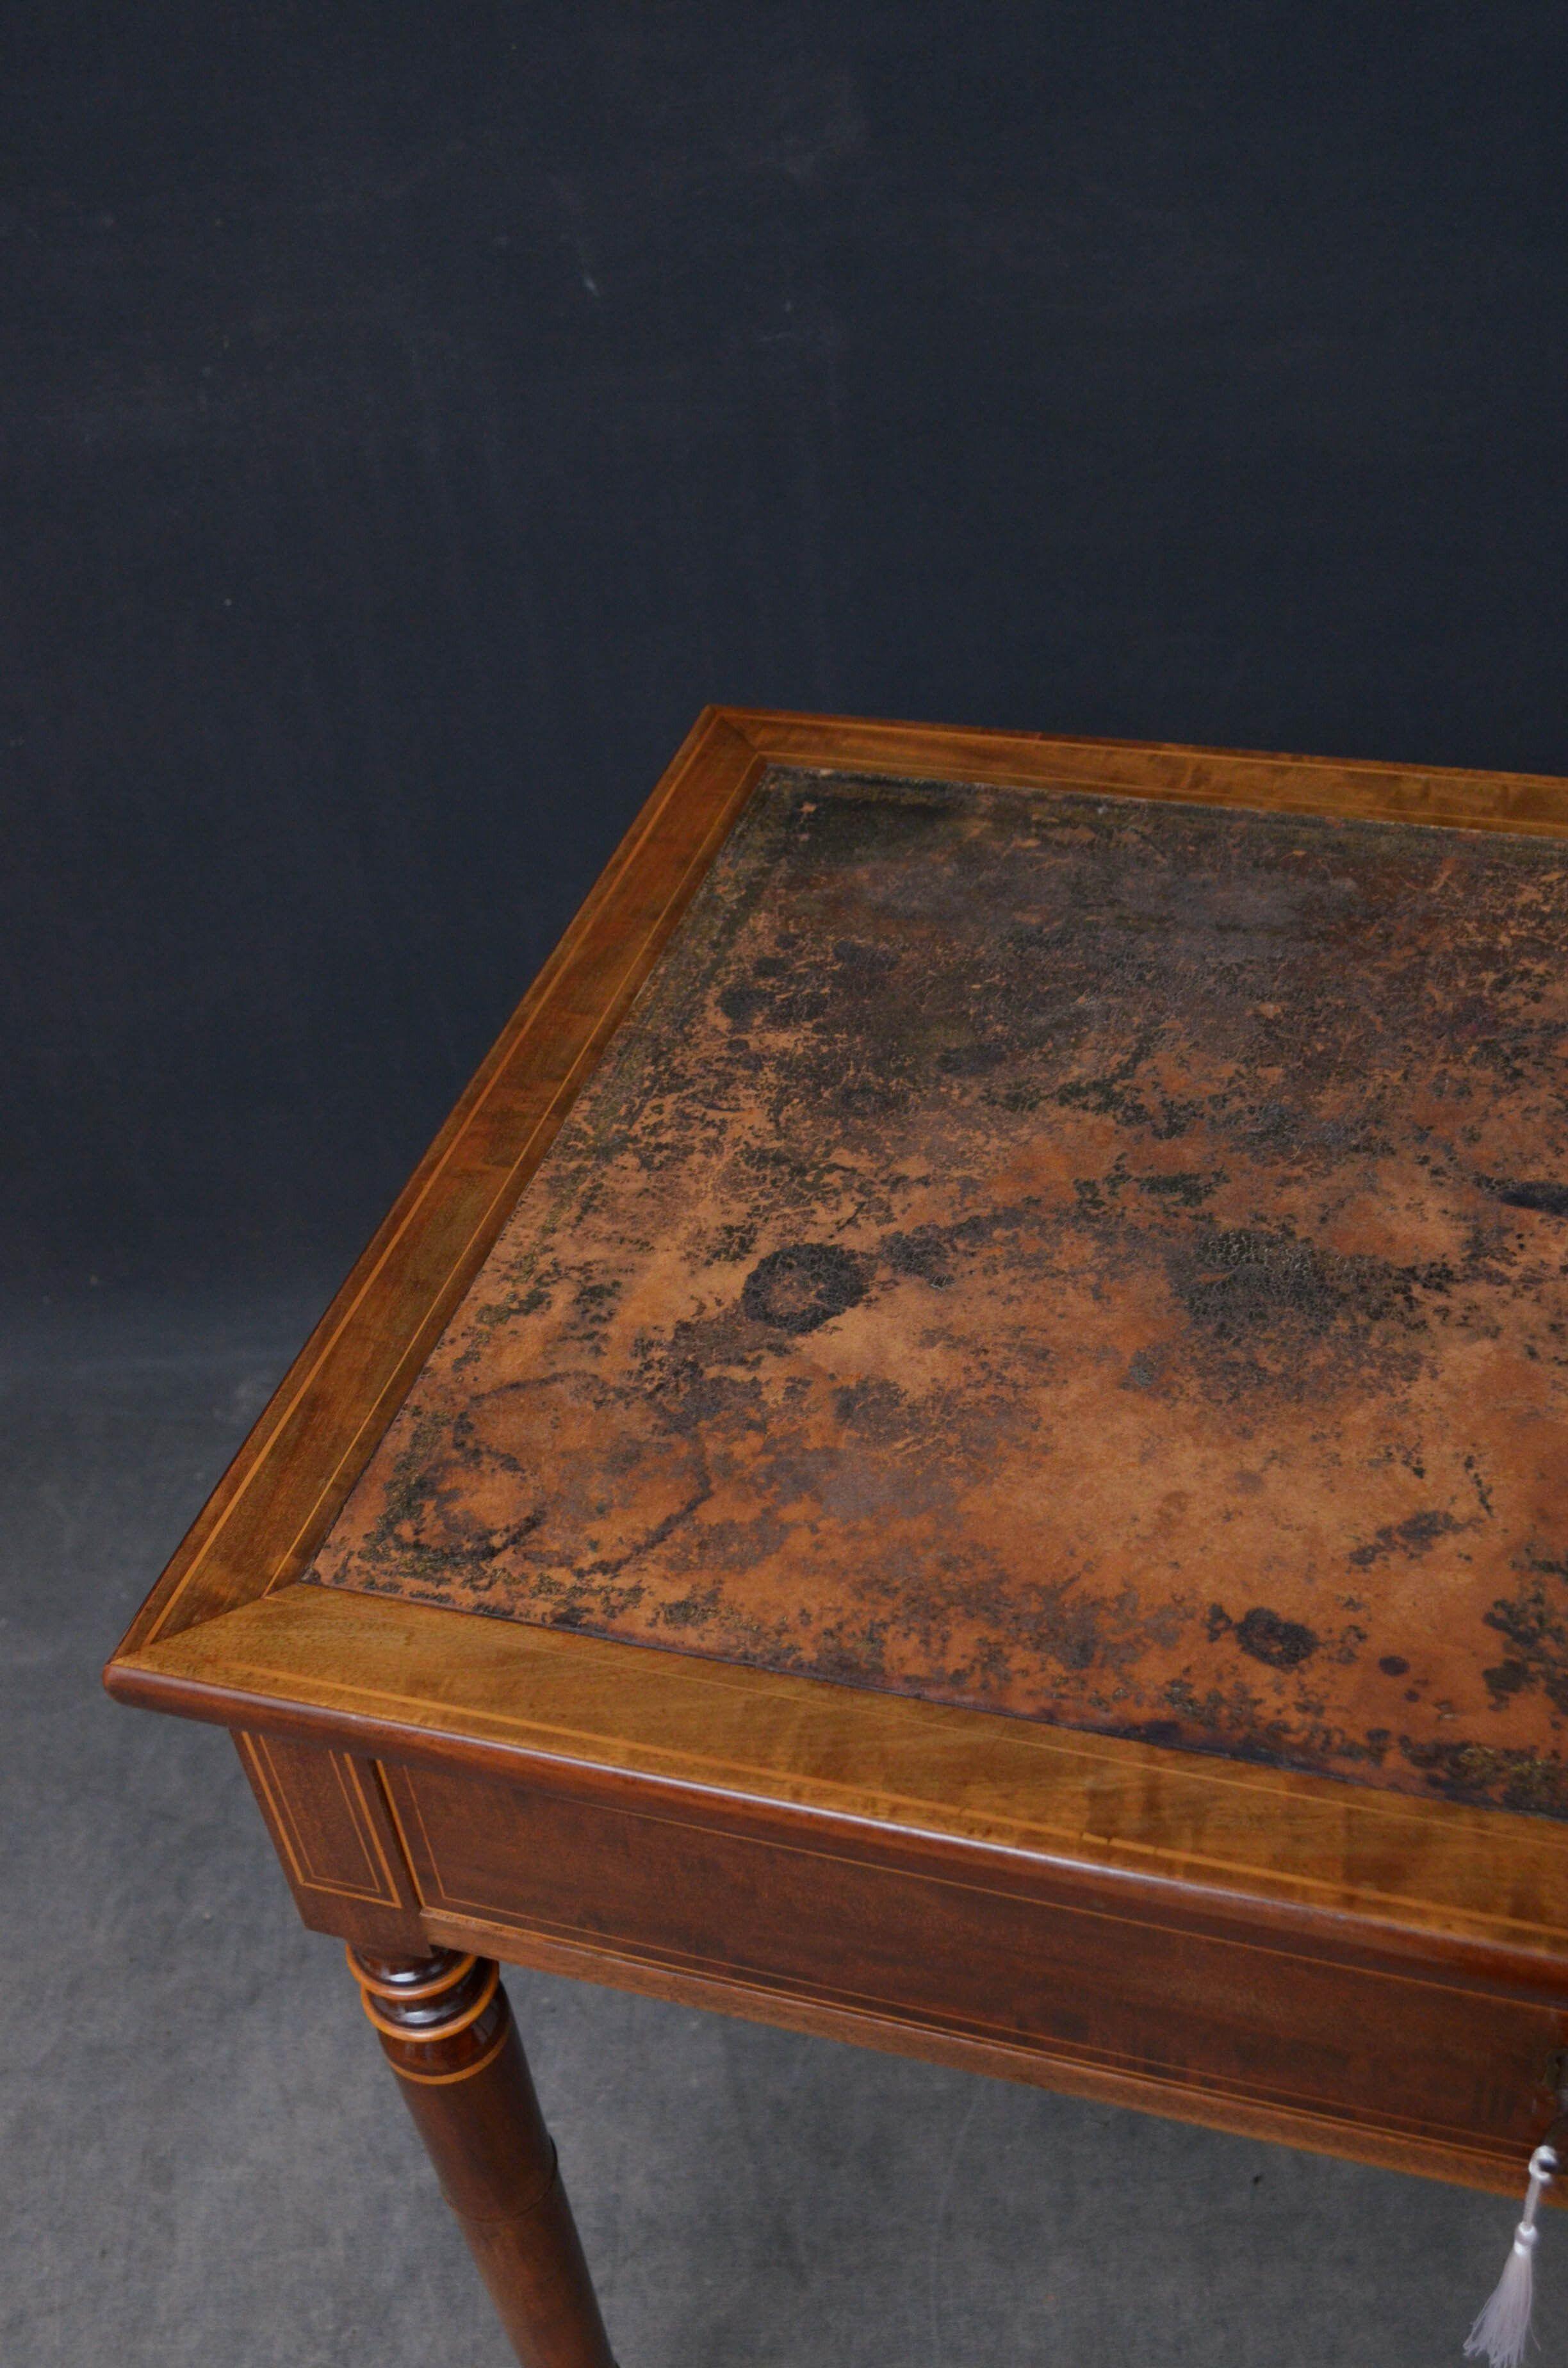 Sn5242 Attractive mahogany table, having original leather writing surface showing extensive usage and good antique character above frieze drawer fitted with original working lock and a key, raised on turned and ringed legs terminating in ball feet.